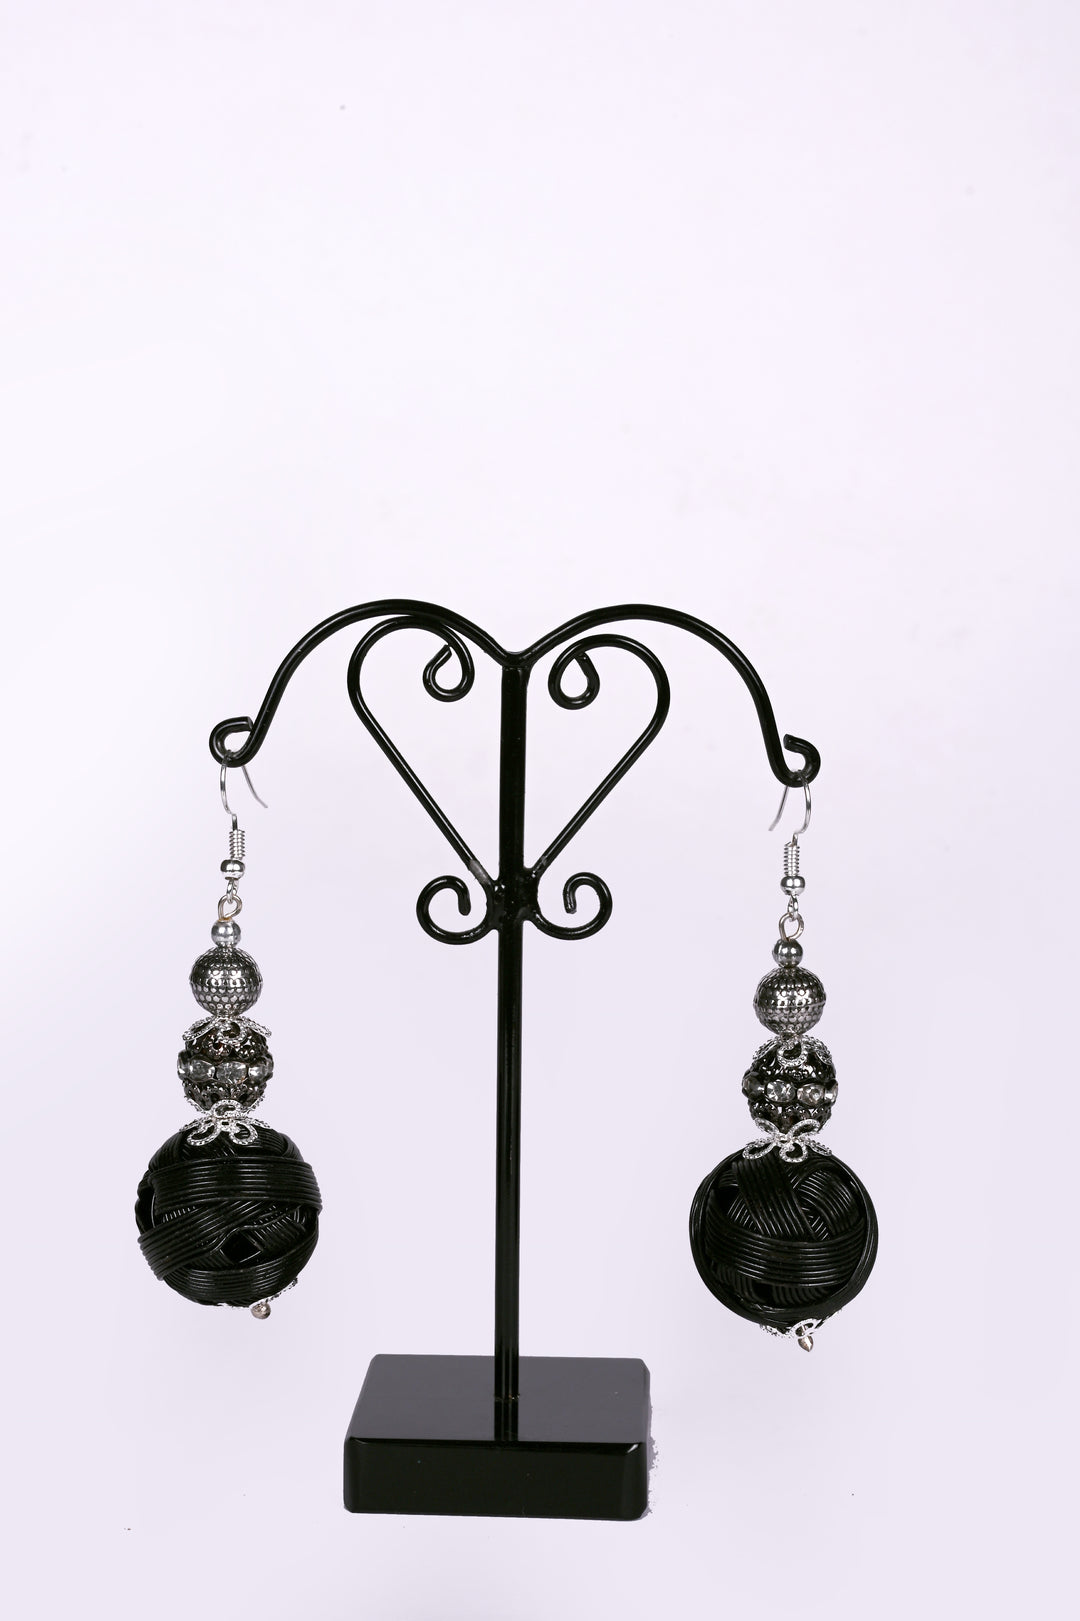 Black Metal Wire Balls Earring Styled With Metal Charms